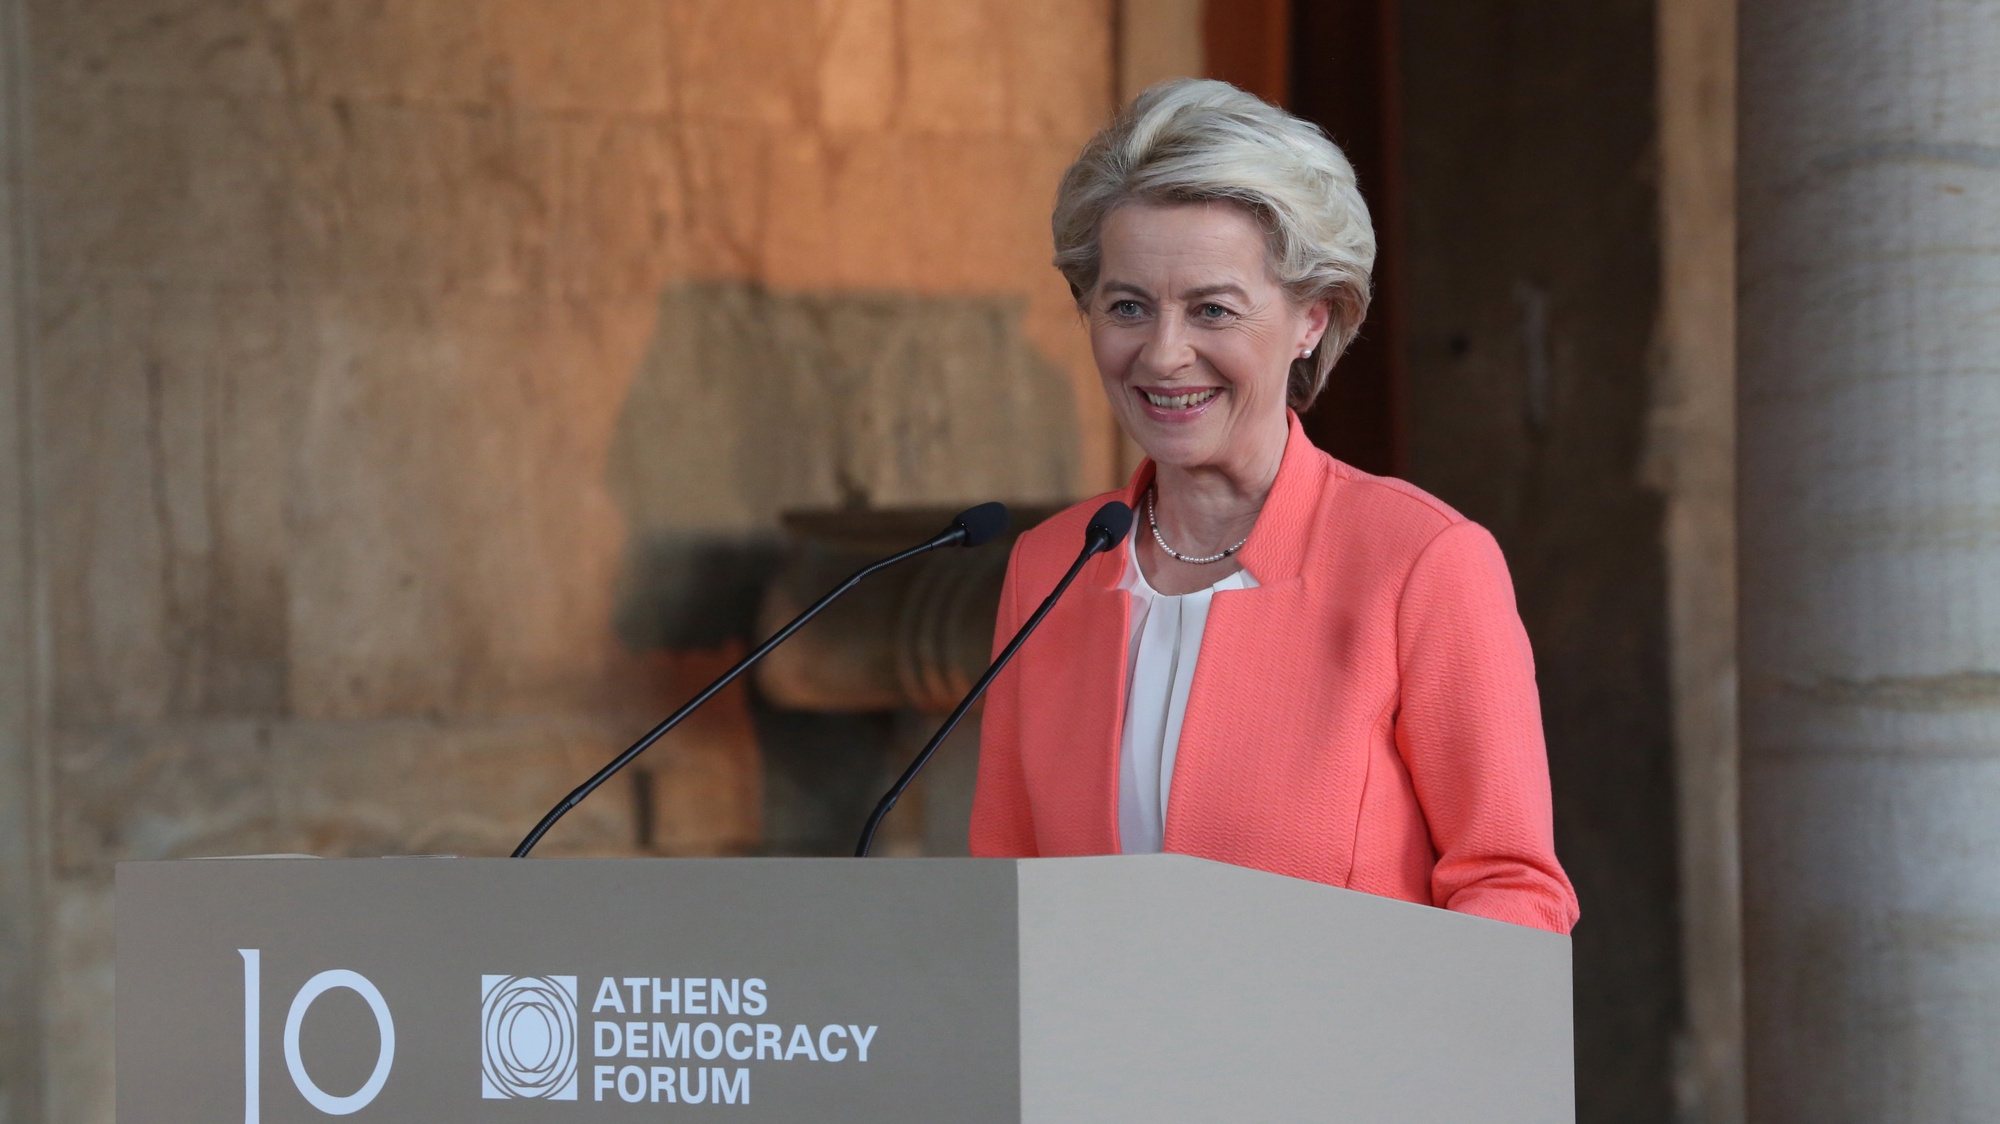 epa10214013 The President of the European Commission Ursula von der Leyen speaks at the Athens Democracy Forum held at the Attalus Gallery, Athens, Greece, 29 September 2022. The Athens Democracy Forum is an annual international conference organized by The Democracy and Culture Foundation taking place since 2013.  EPA/Alexander Beltes